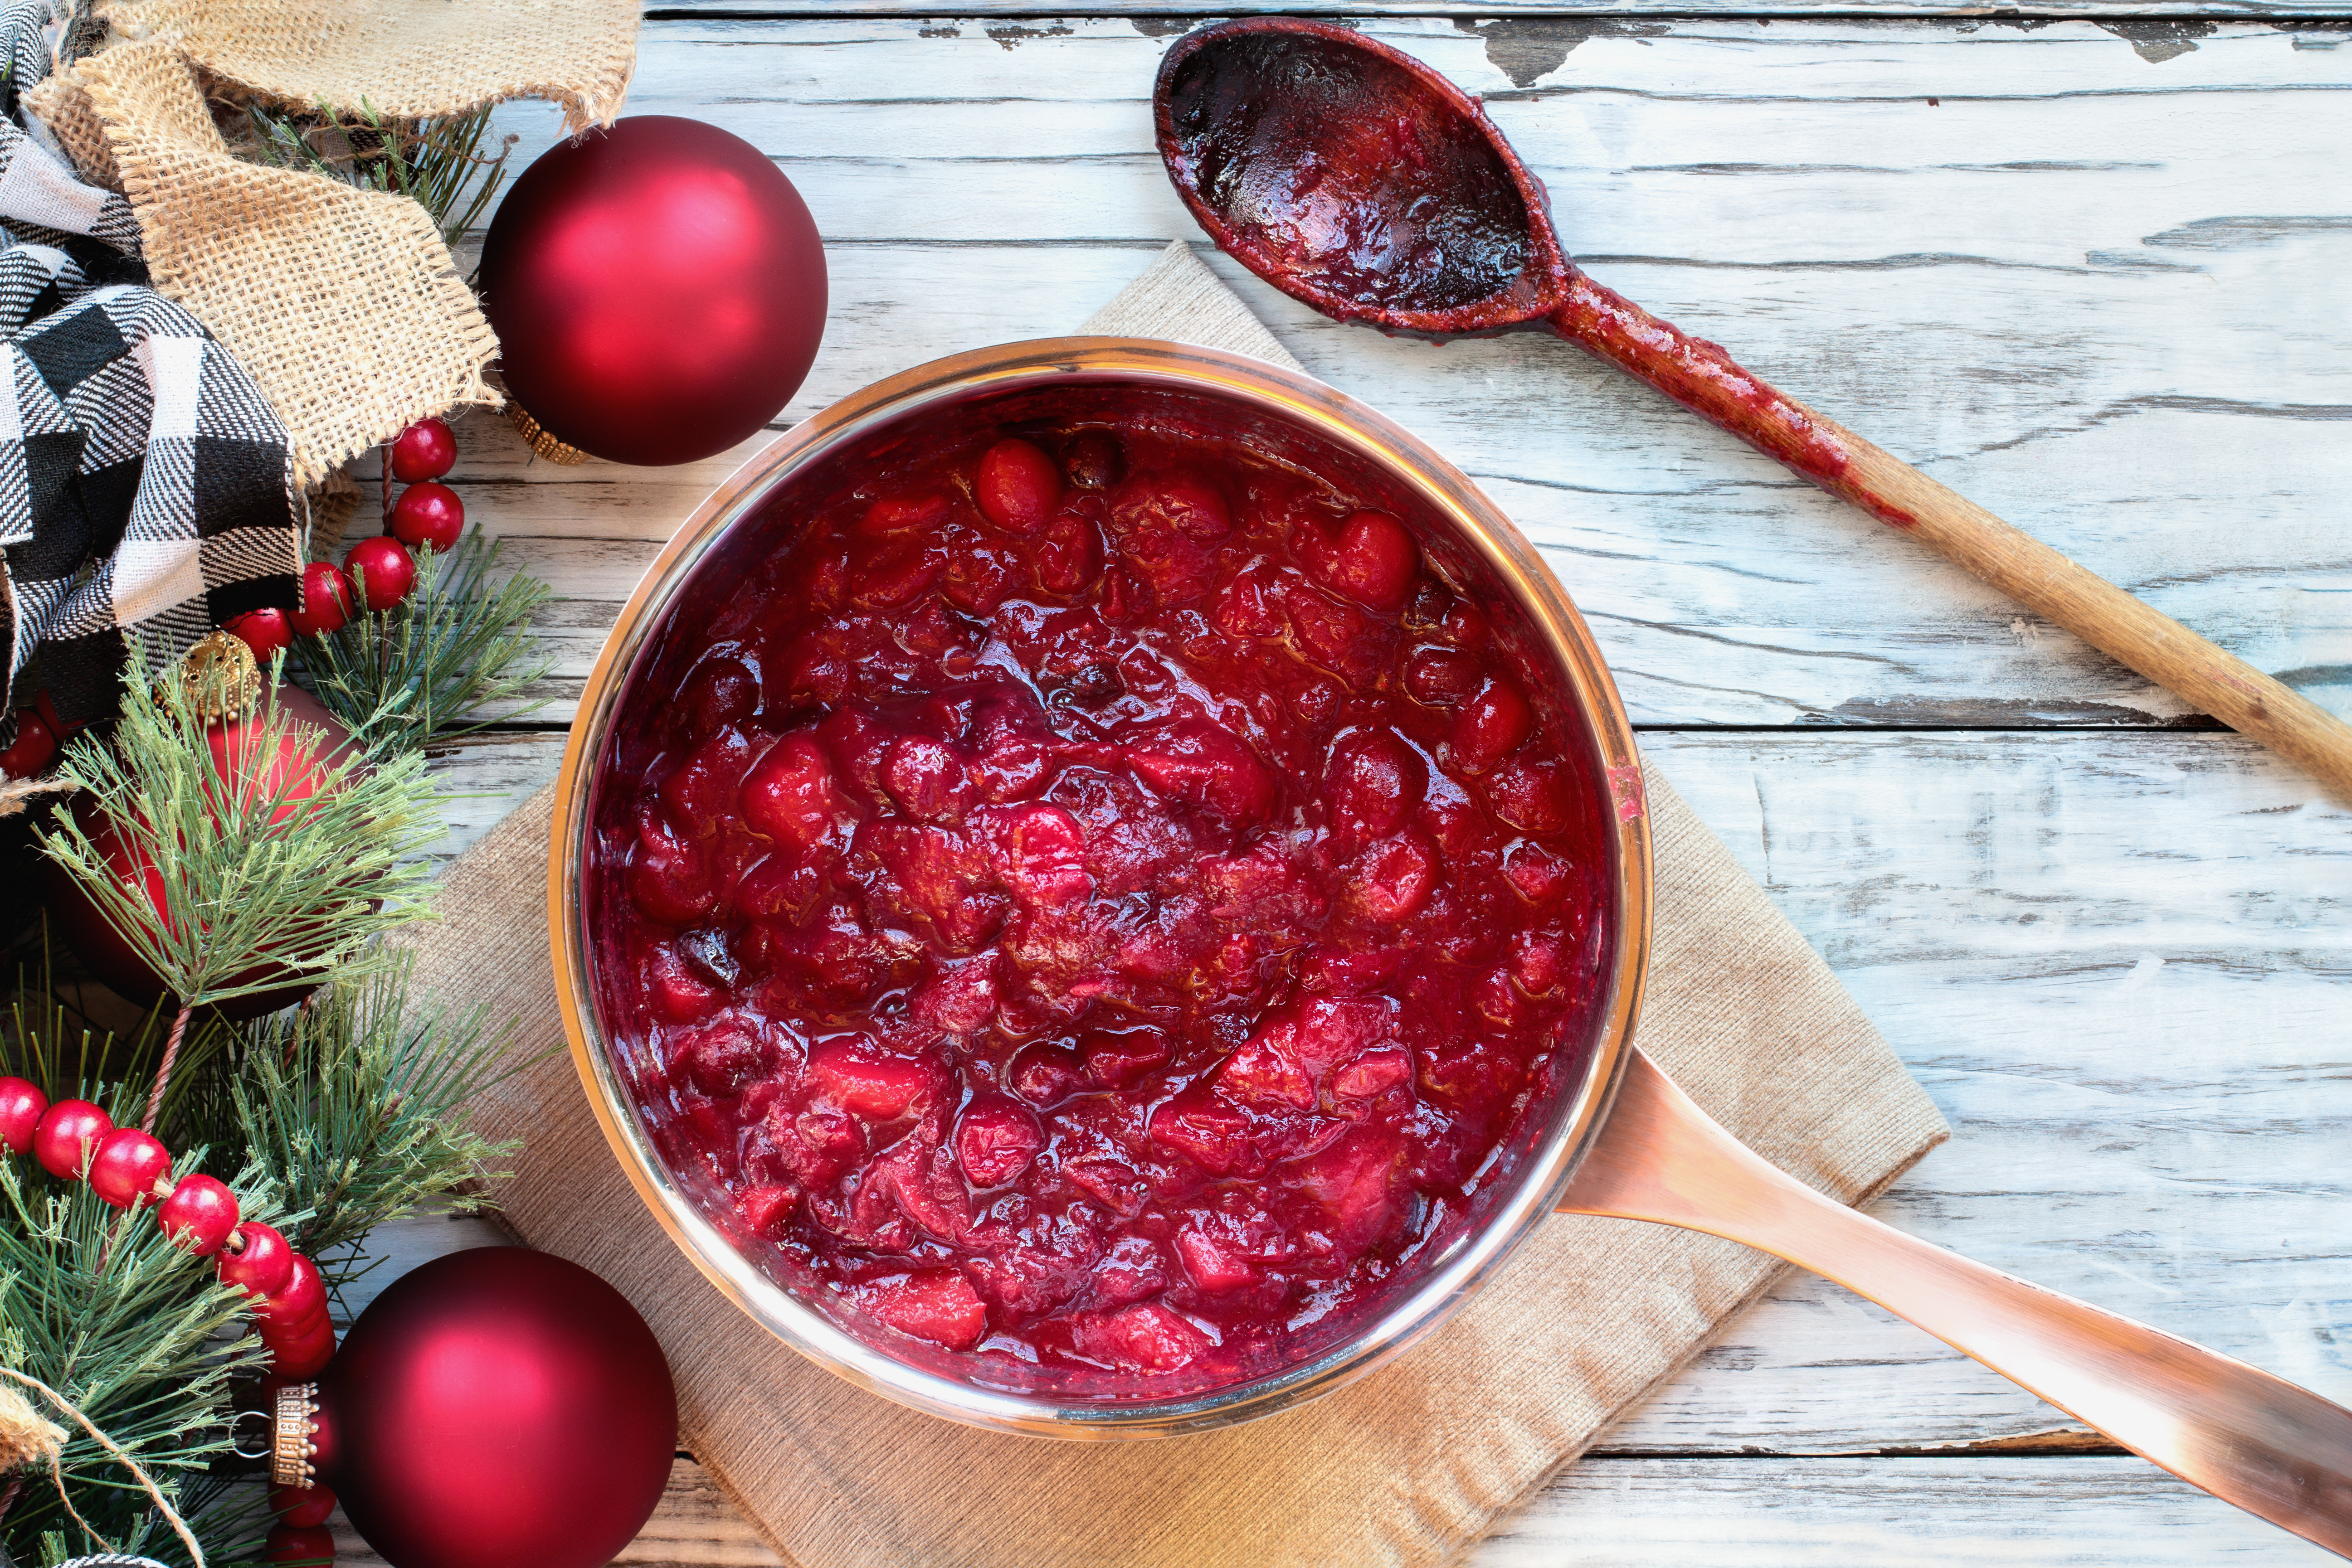 Tasty Tips for Healthy Holidays